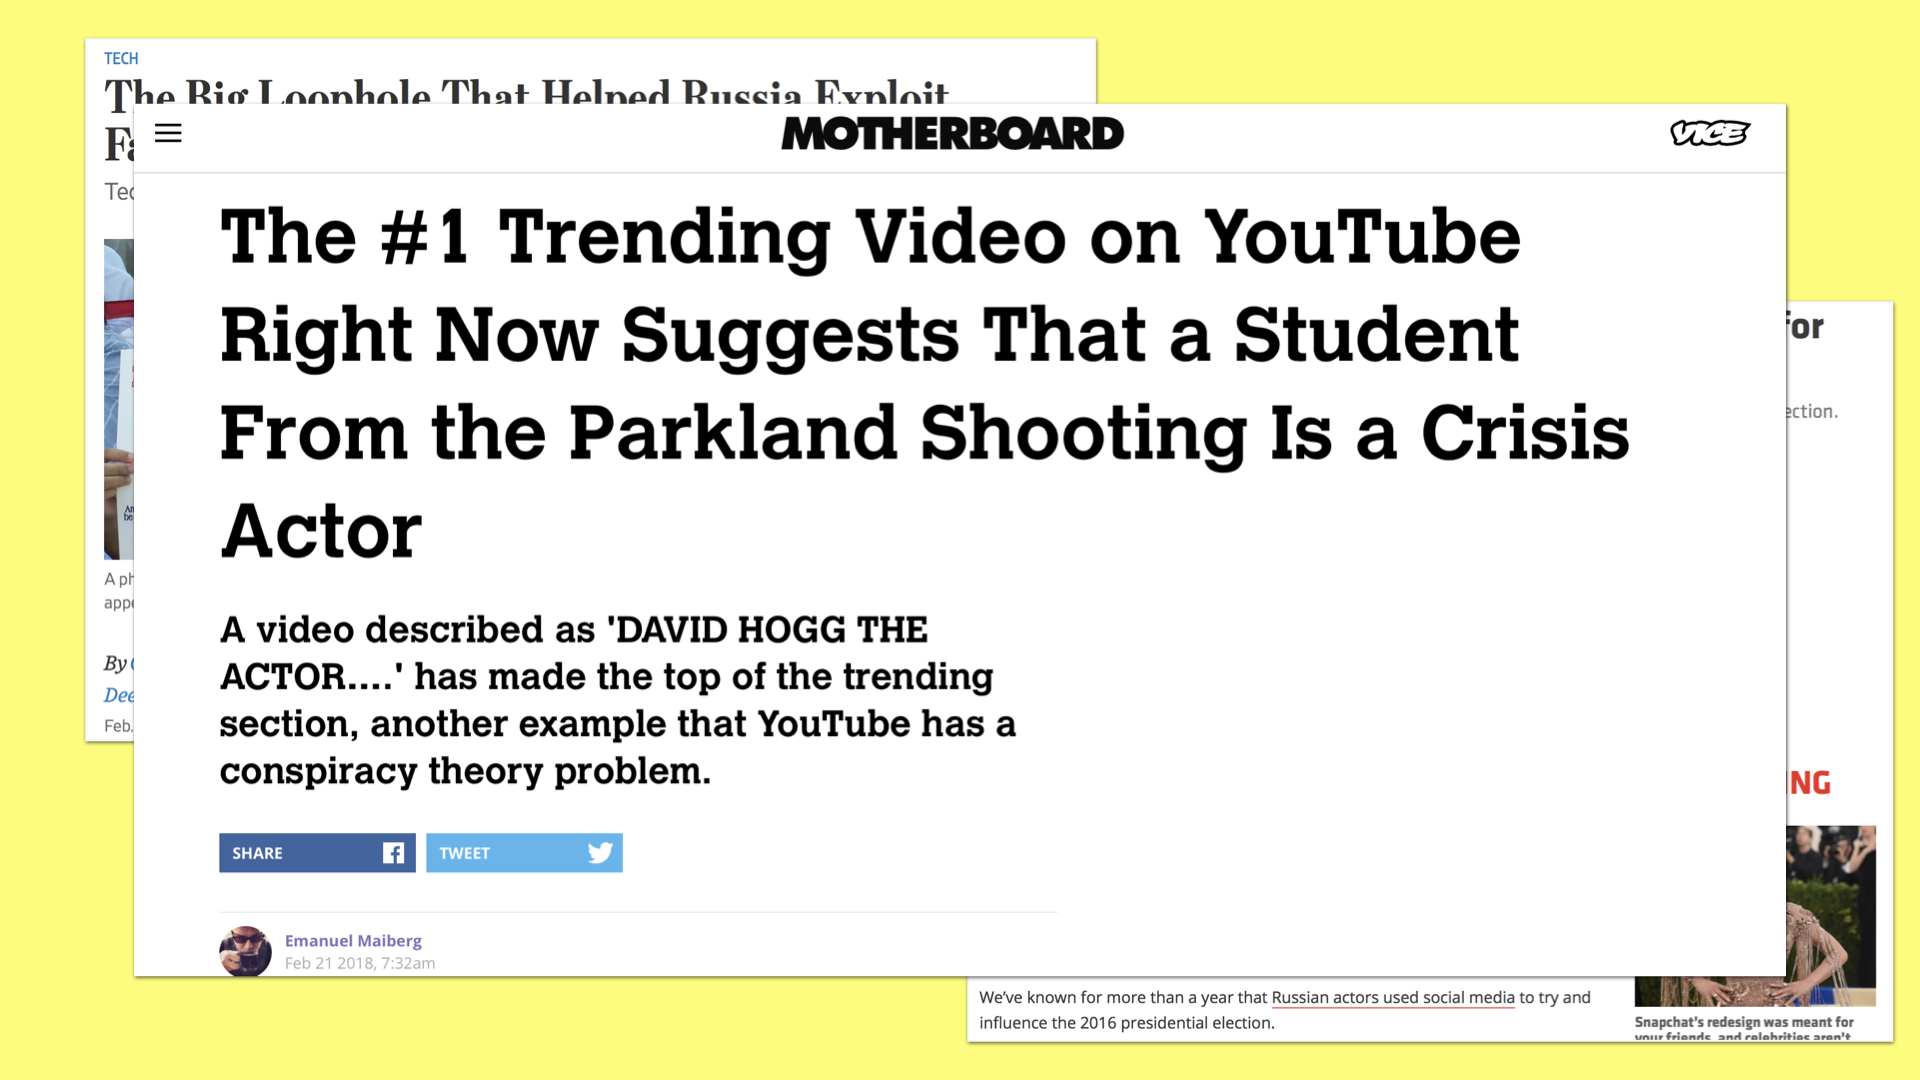 The #1 Trending Video on YouTube Right Now Suggests That a Student From the Parkland Shooting Is a Crisis Actor